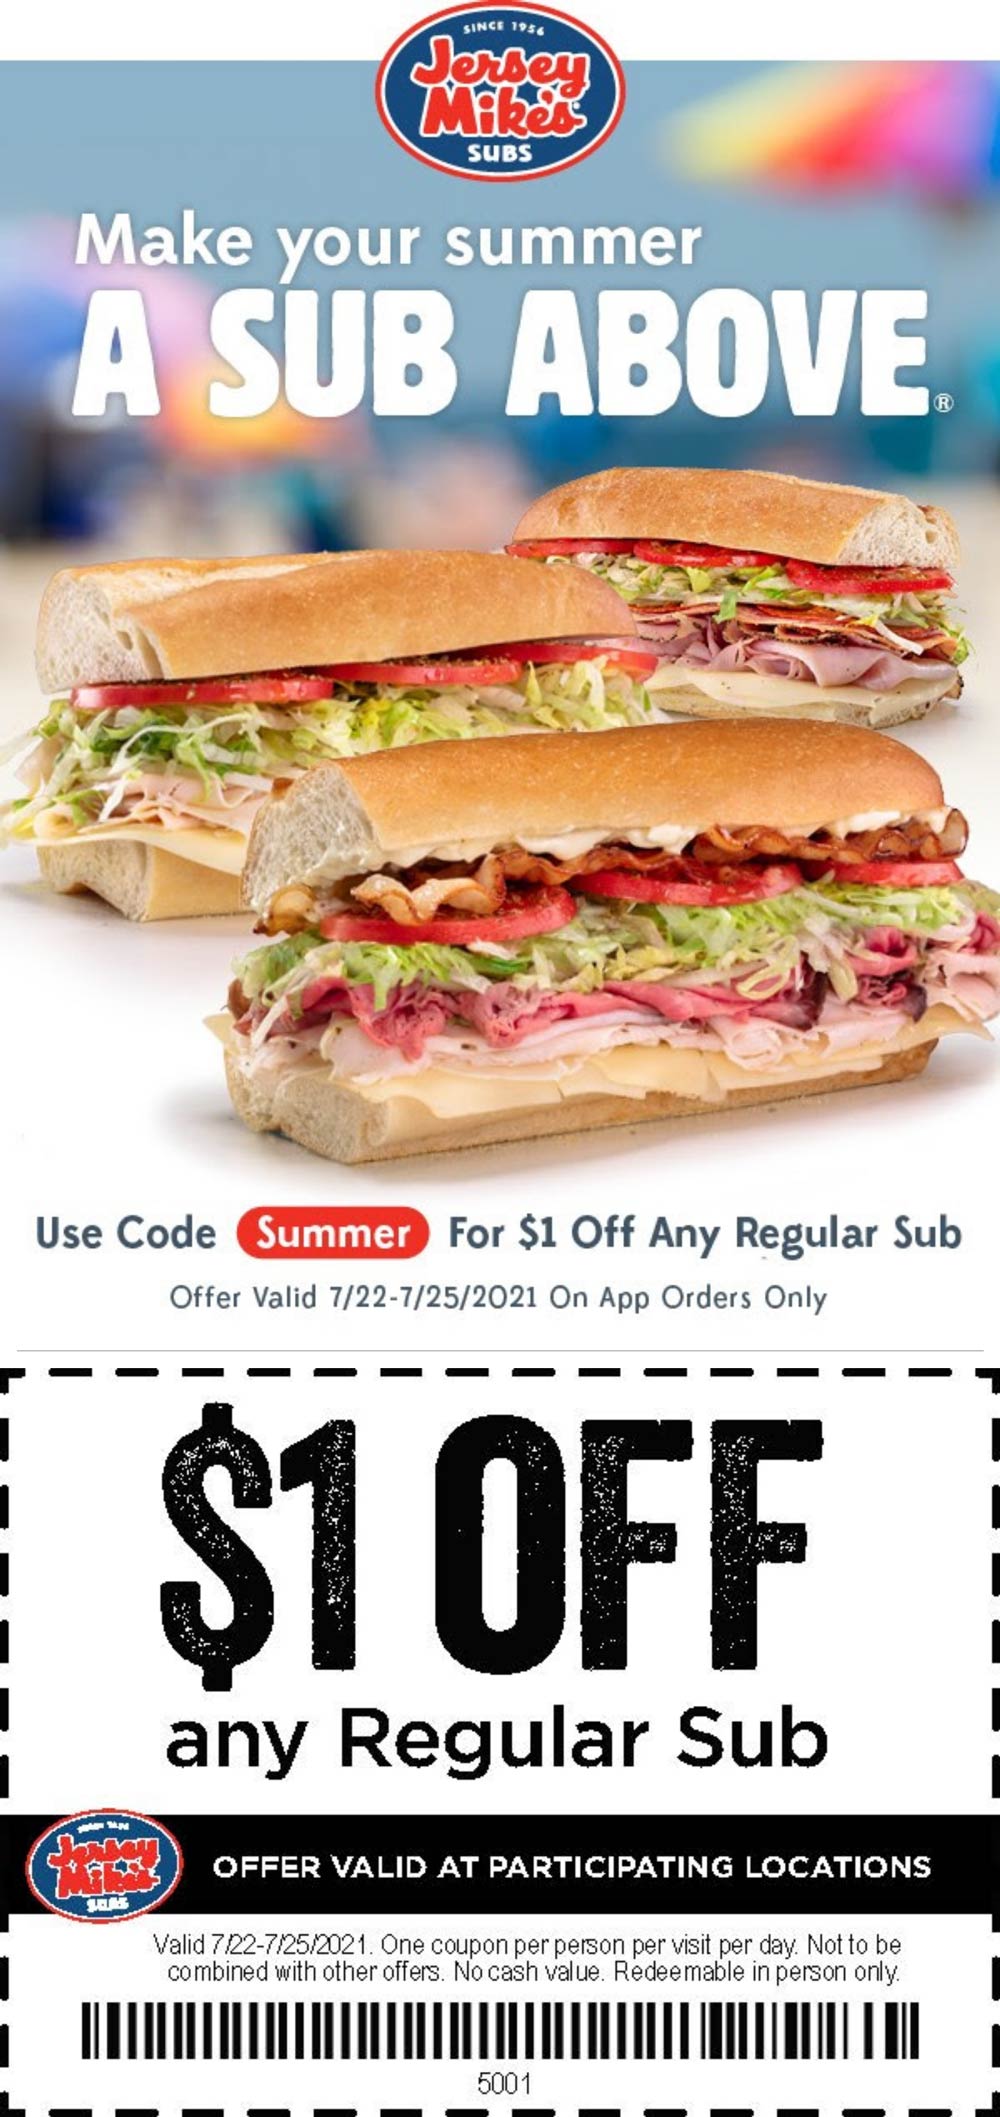 Jersey Mikes restaurants Coupon  $1 off your sub sandwich at Jersey Mikes #jerseymikes 